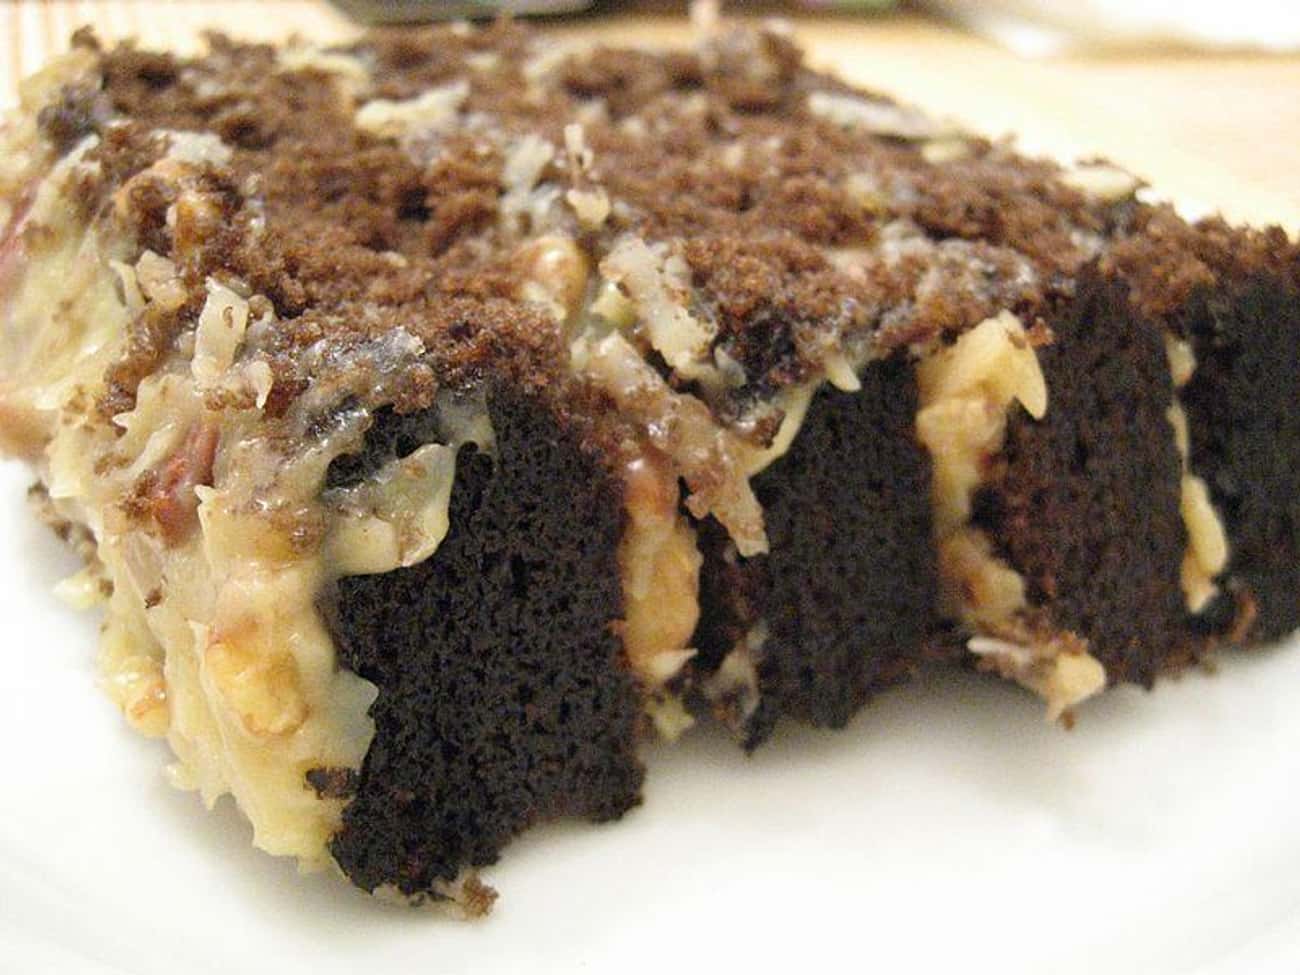 German Chocolate Cake Is Named After A Person, Not The Country